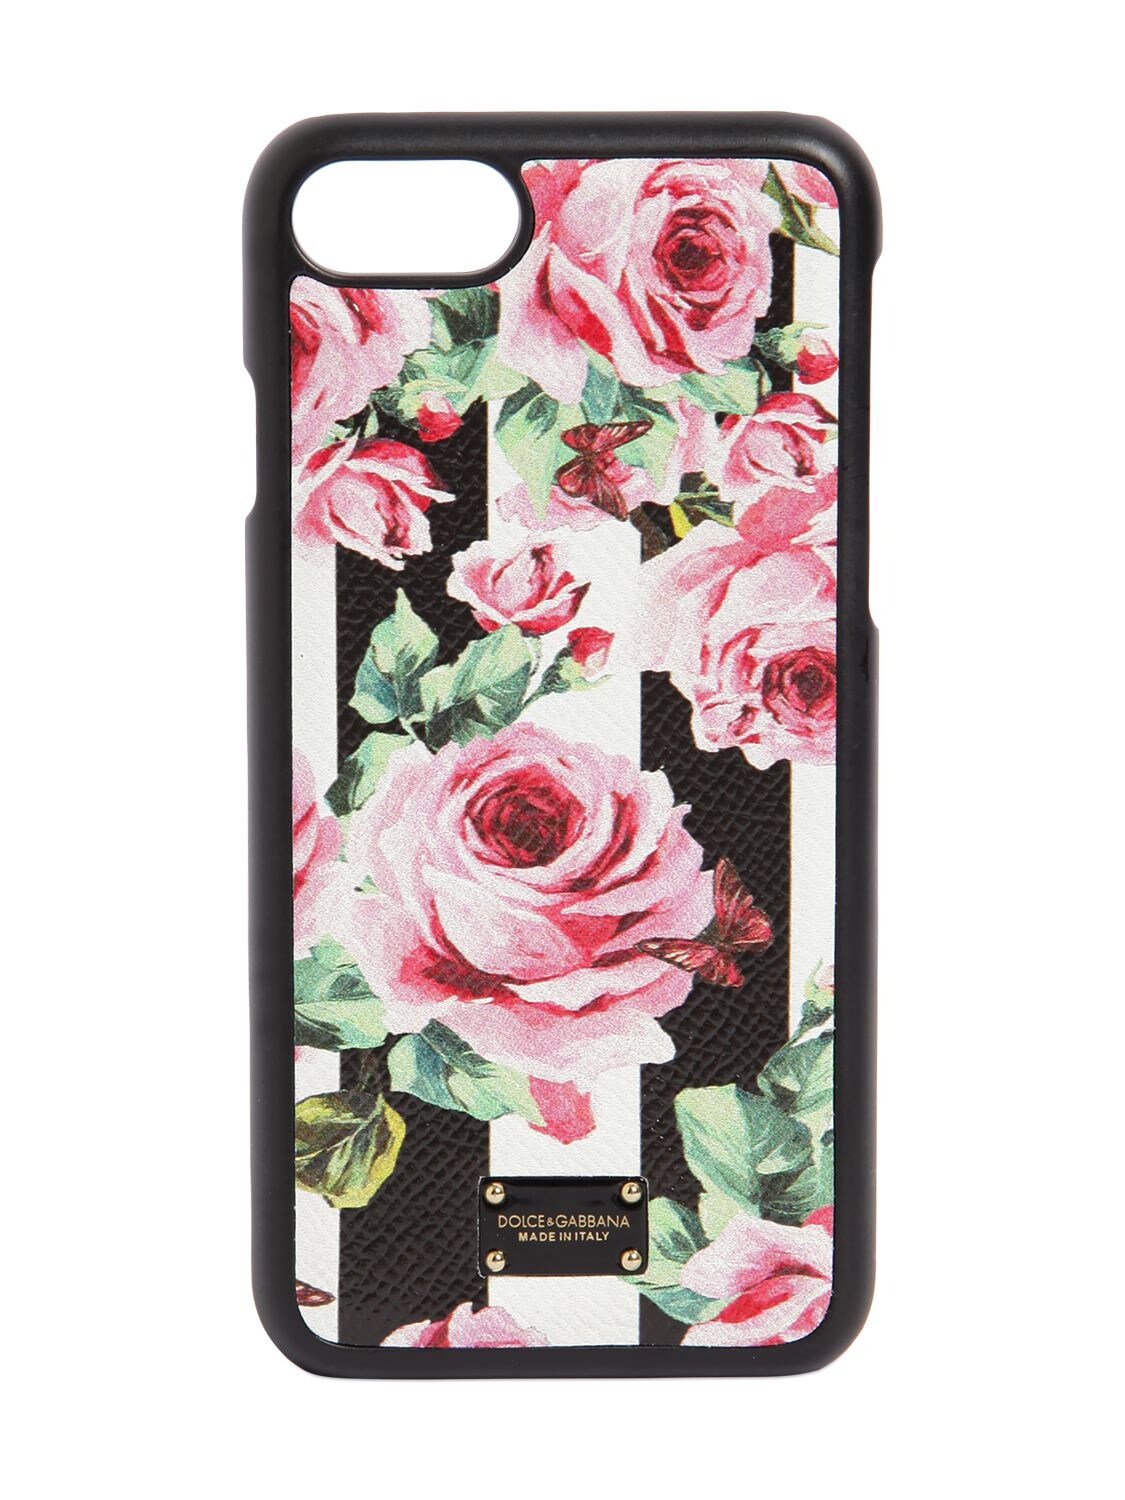 ROSE PRINTED LEATHER IPHONE 7 COVER